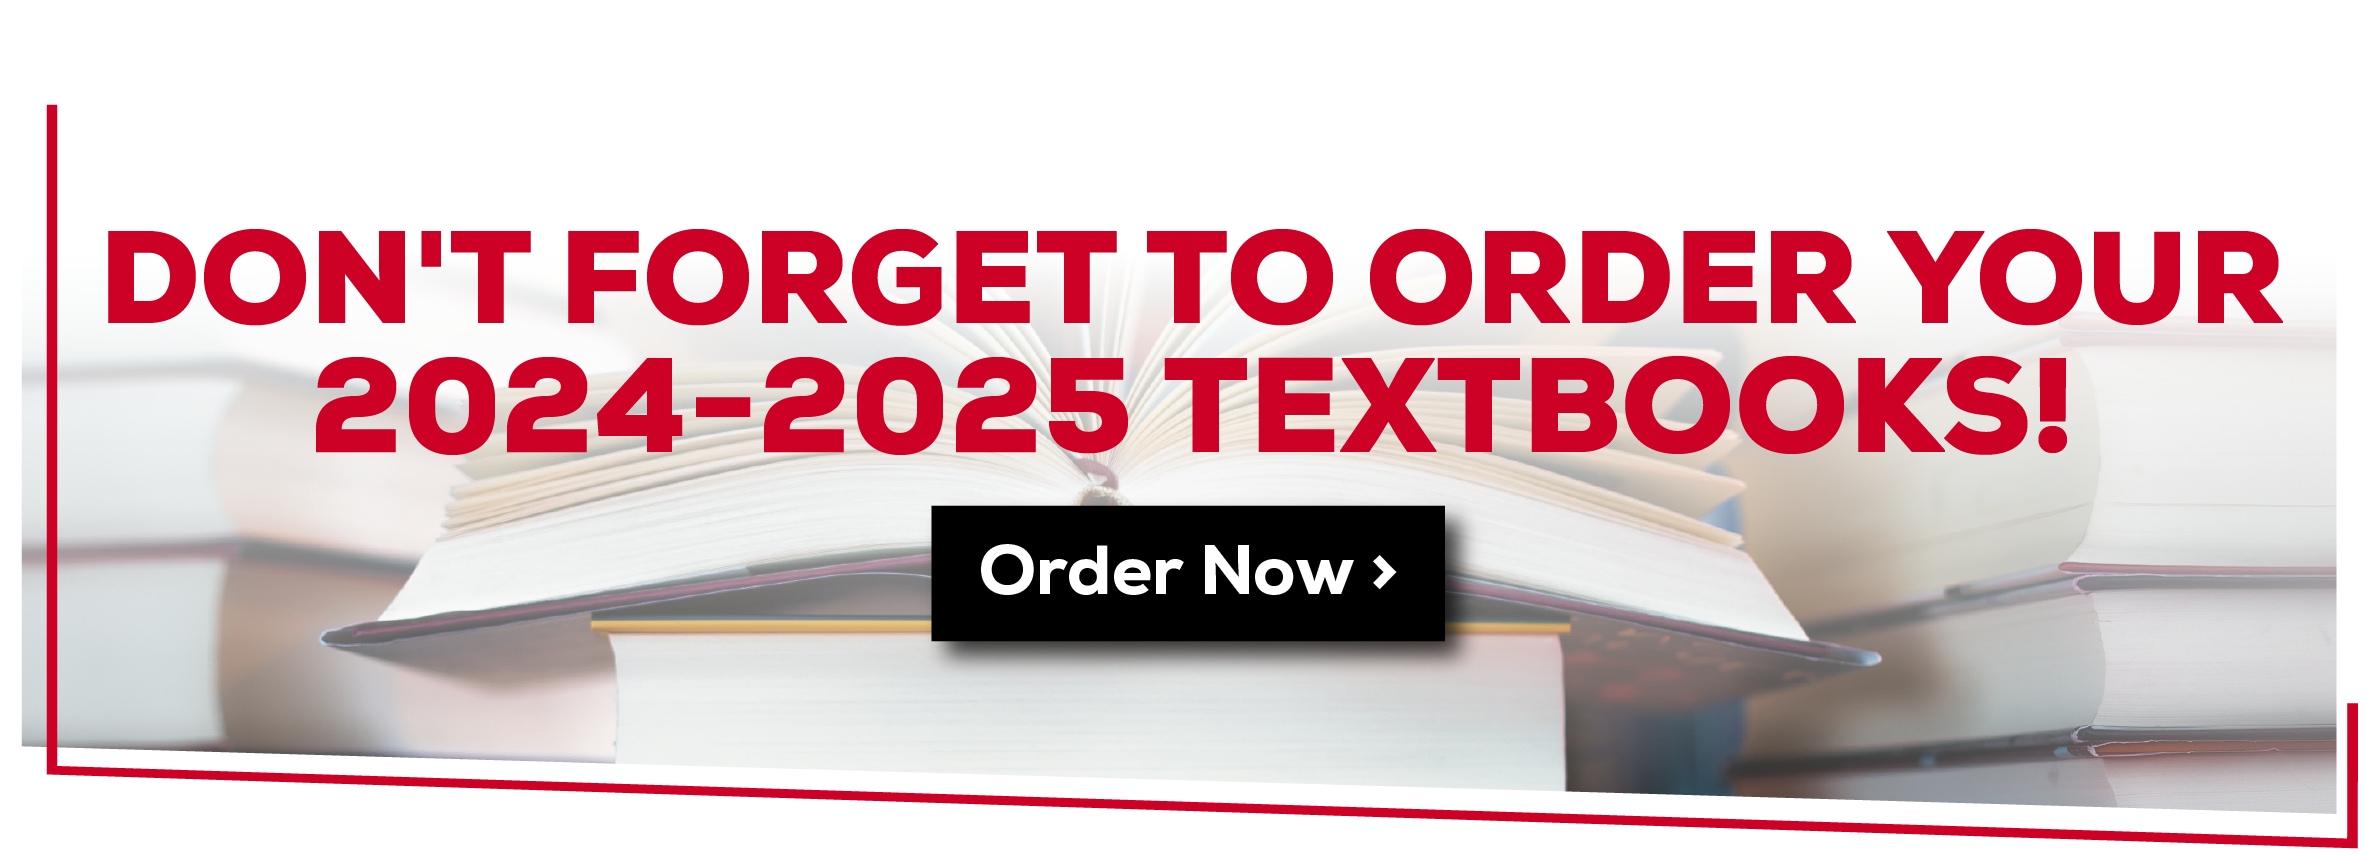 Don't forget to order your 2024-2025 textbooks! Order now.